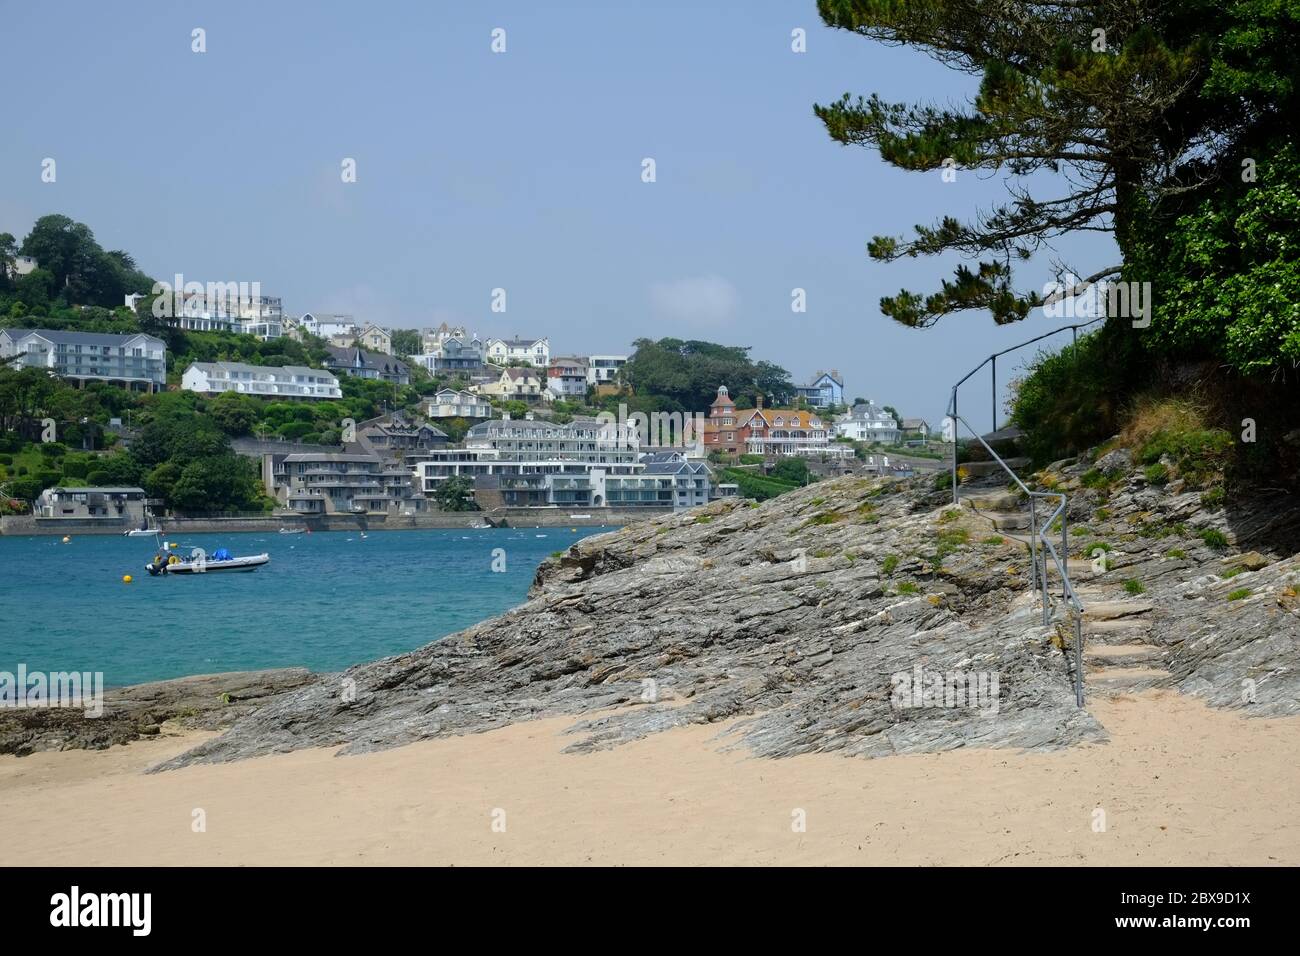 Mill Bay Beach at East Portlemouth, looking towards Salcombe town and estuary on a bright summer's day. Stock Photo